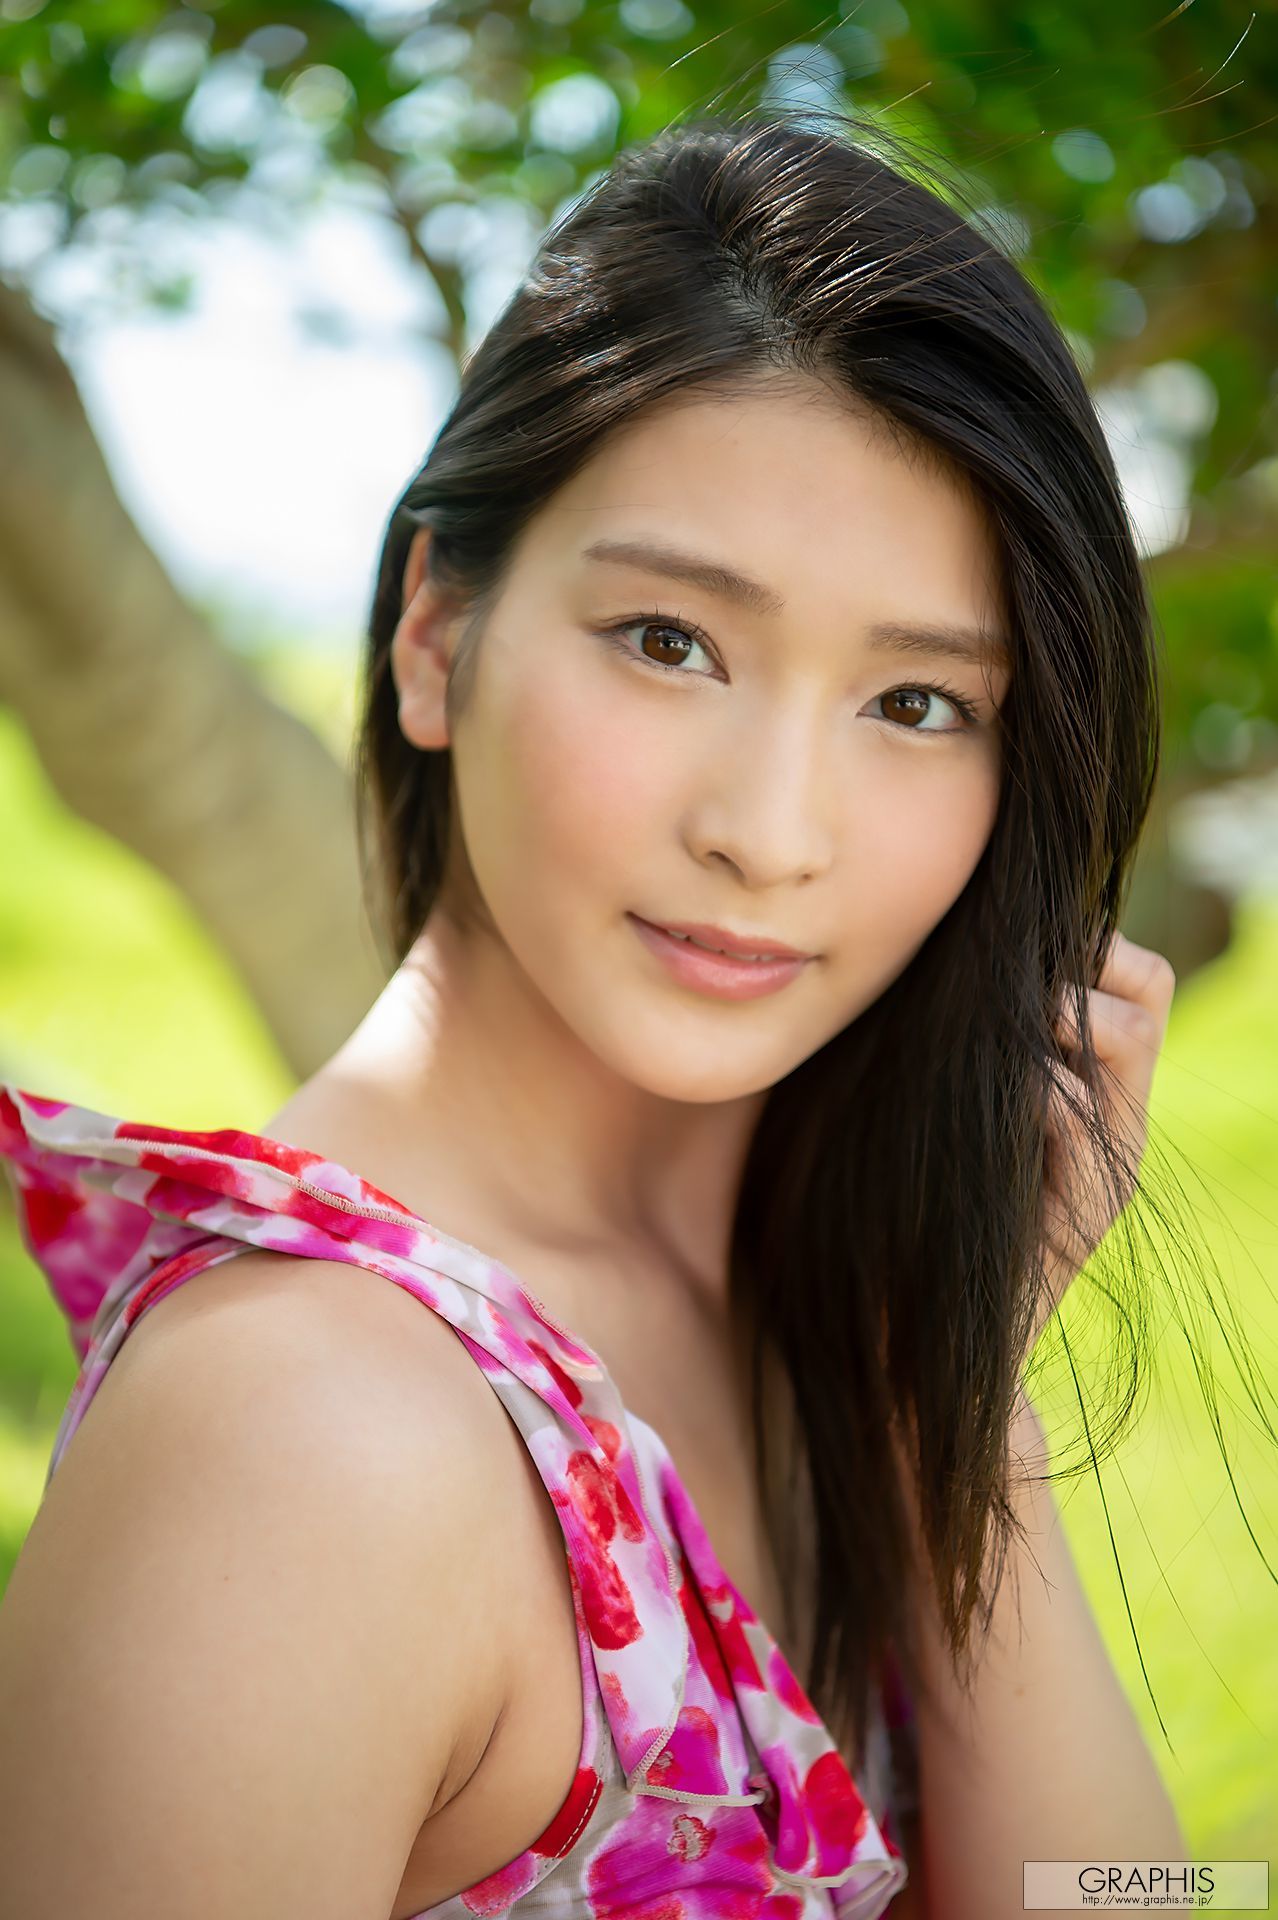 [Graphis] Gals NO.436 Suzu Honjo 本庄鈴 - A NEW STAR![54](第2页)